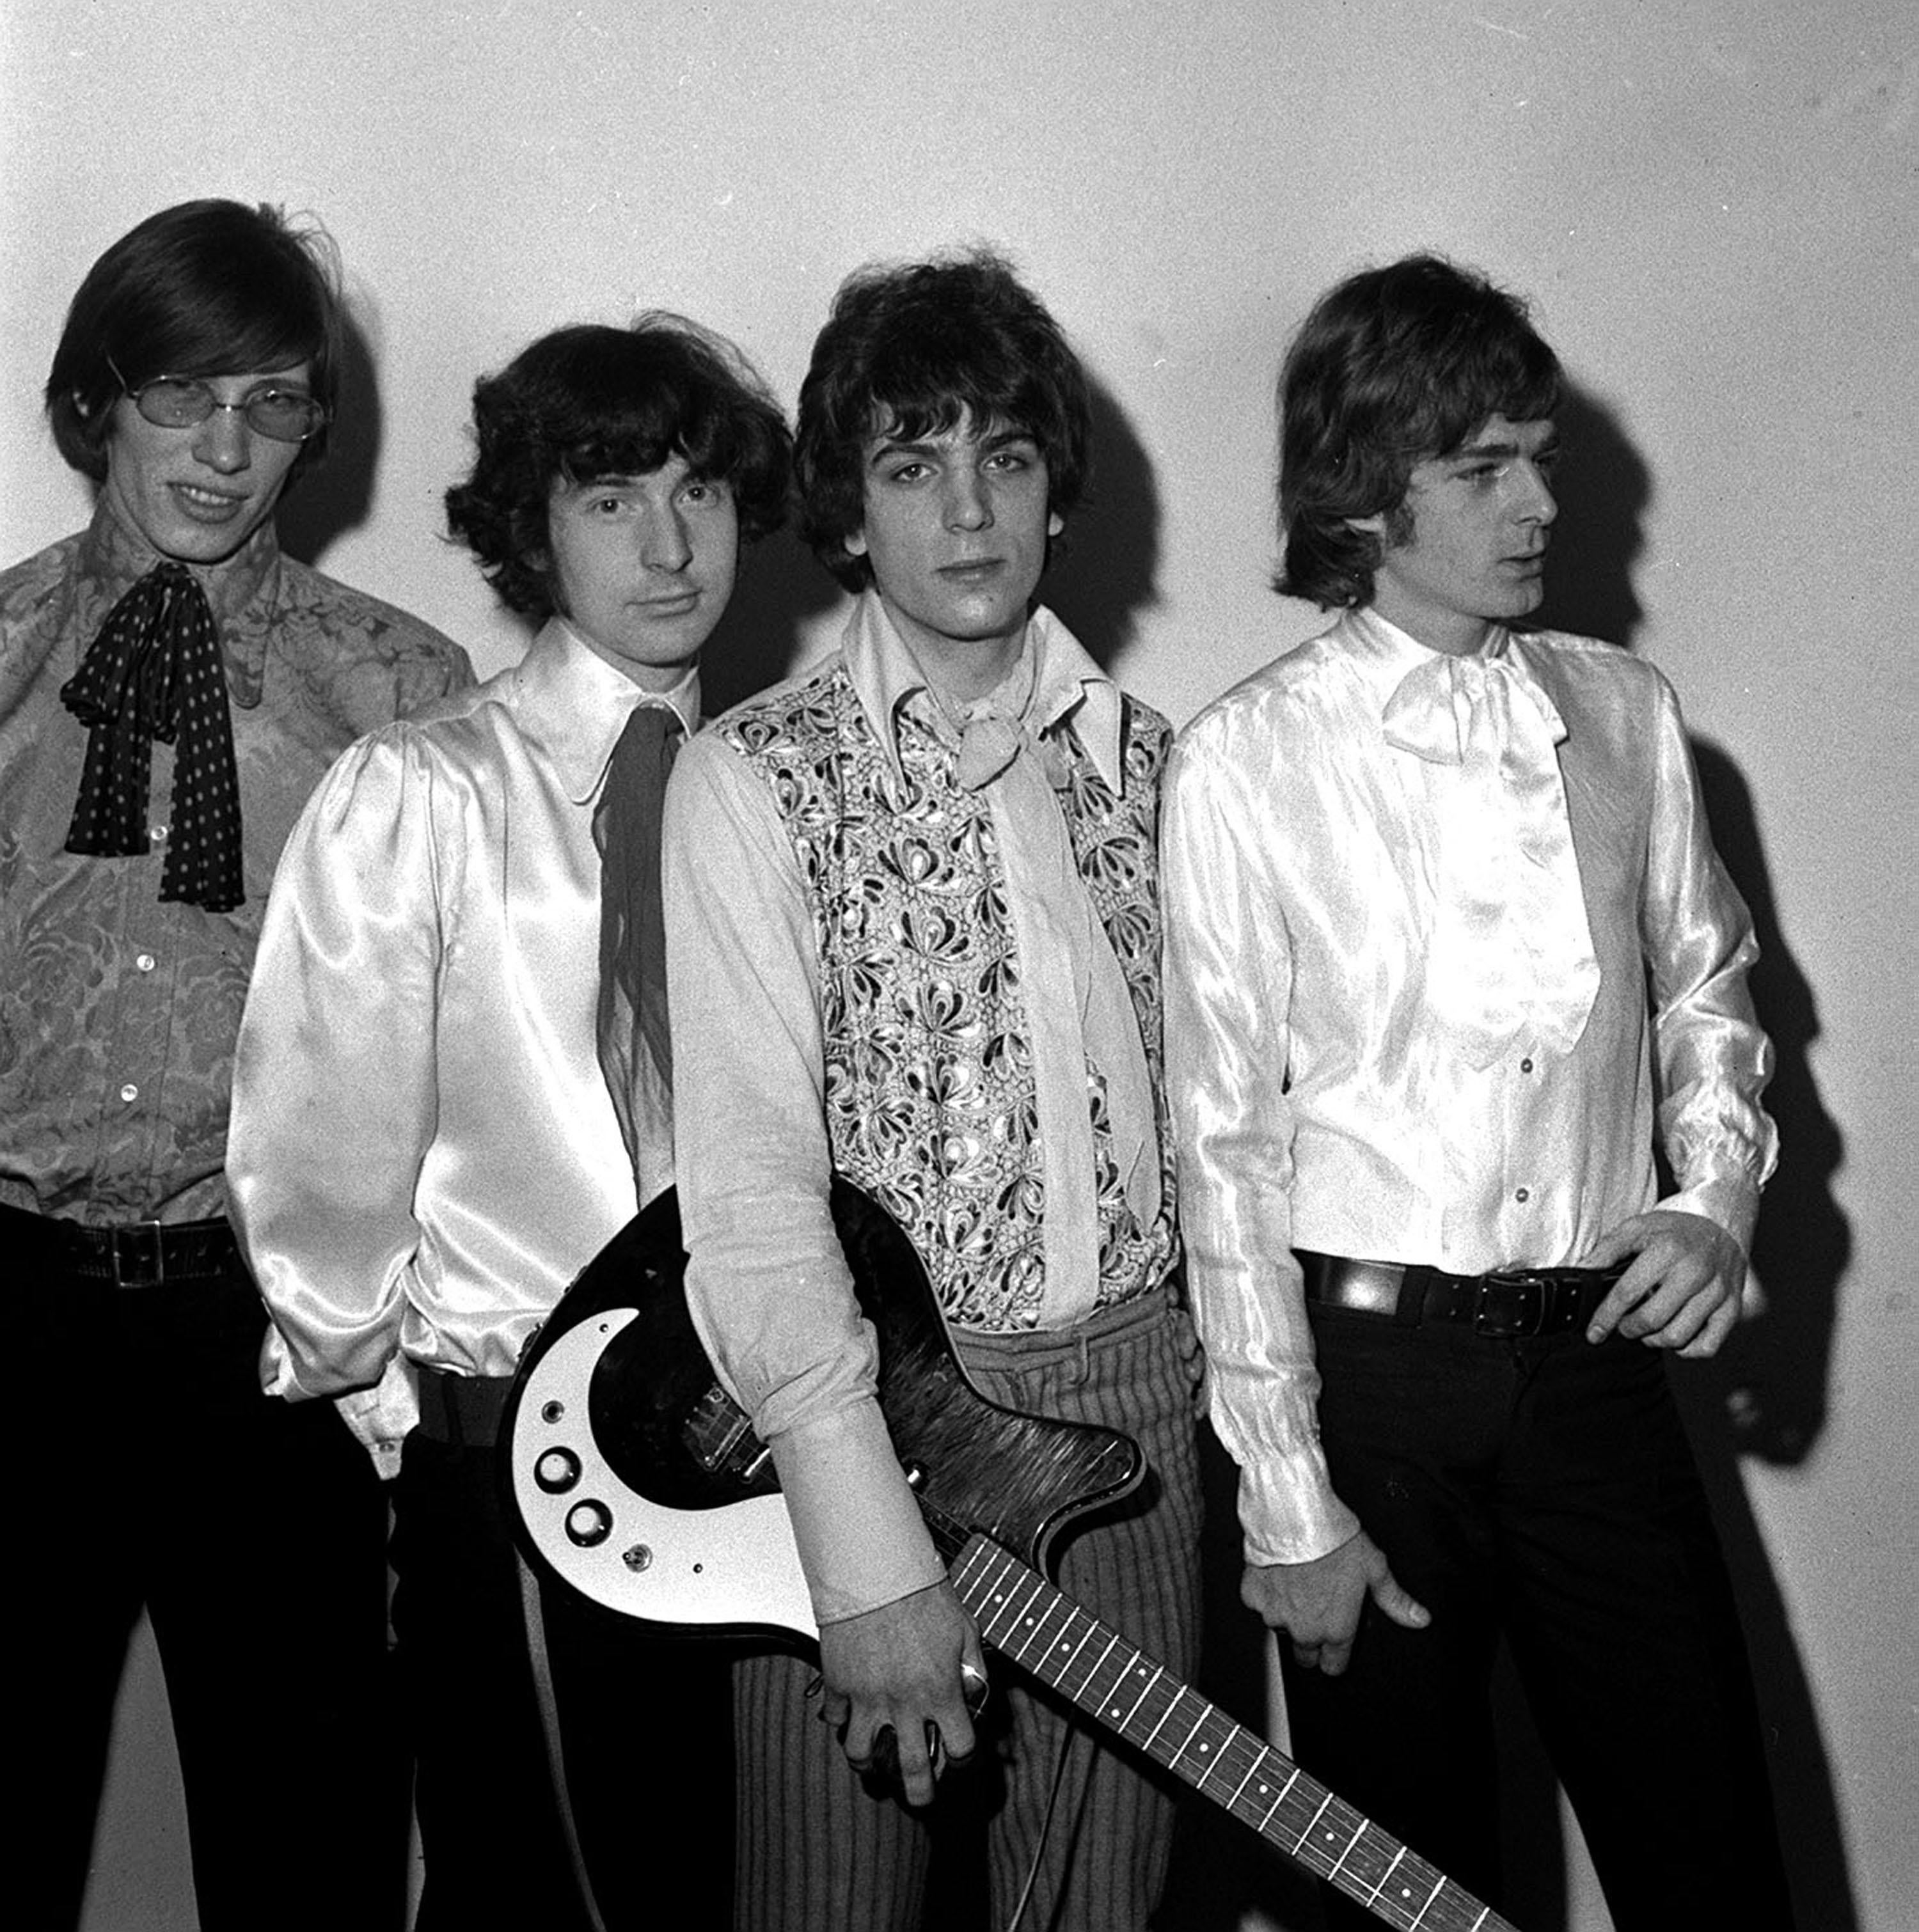 Roger Waters, Nick Mason, Syd Barrett and Rick Wright of Pink Floyd in 1967